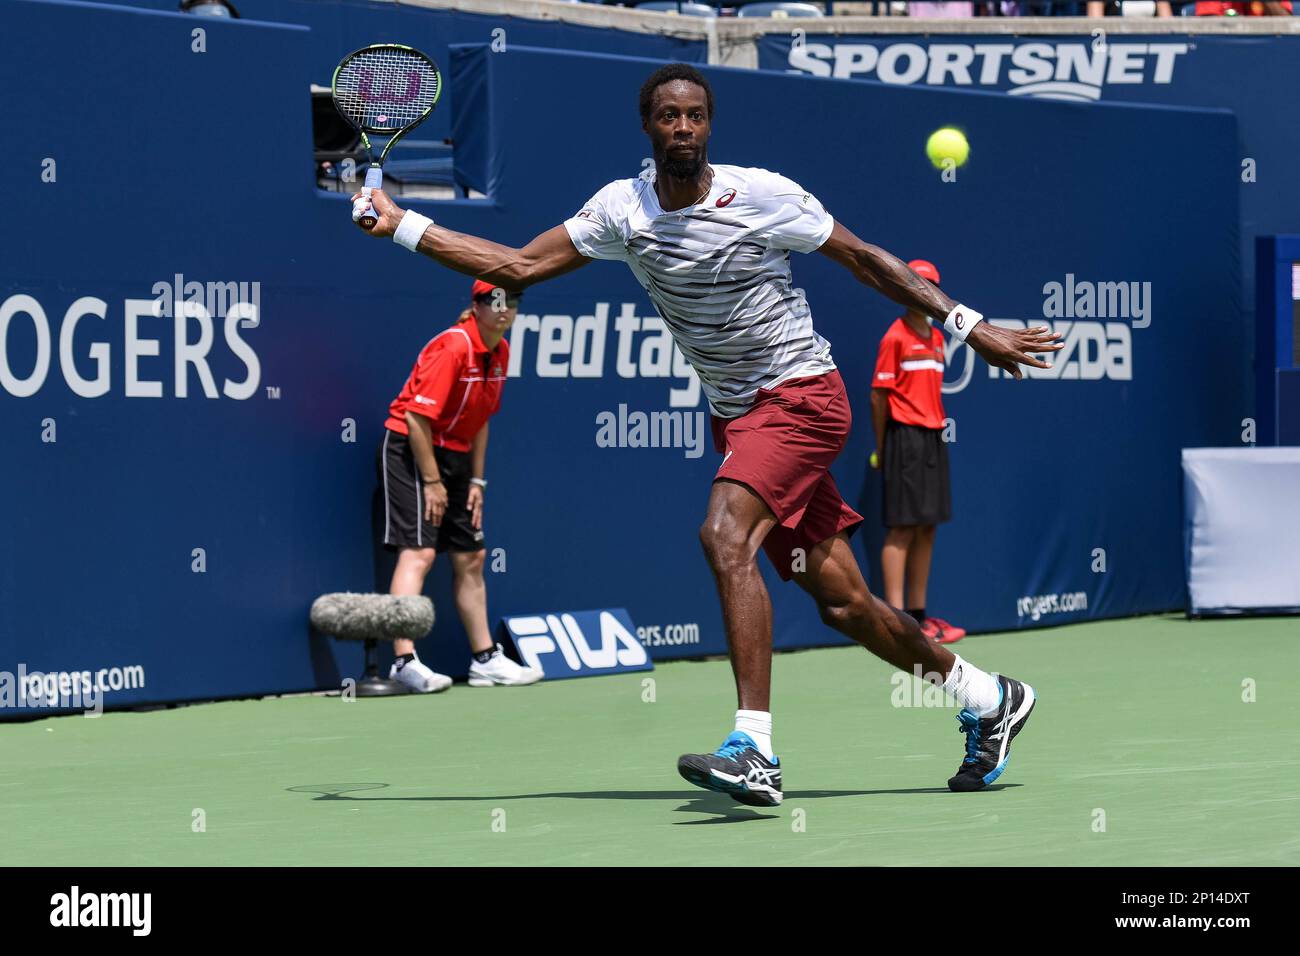 July 26, 2016: Gael Monfils of France returns the ball to Joao Sousa or  Portugal during their first round match of the Rogers Cup tournament at the  Aviva Centre in Toronto, Ontario,